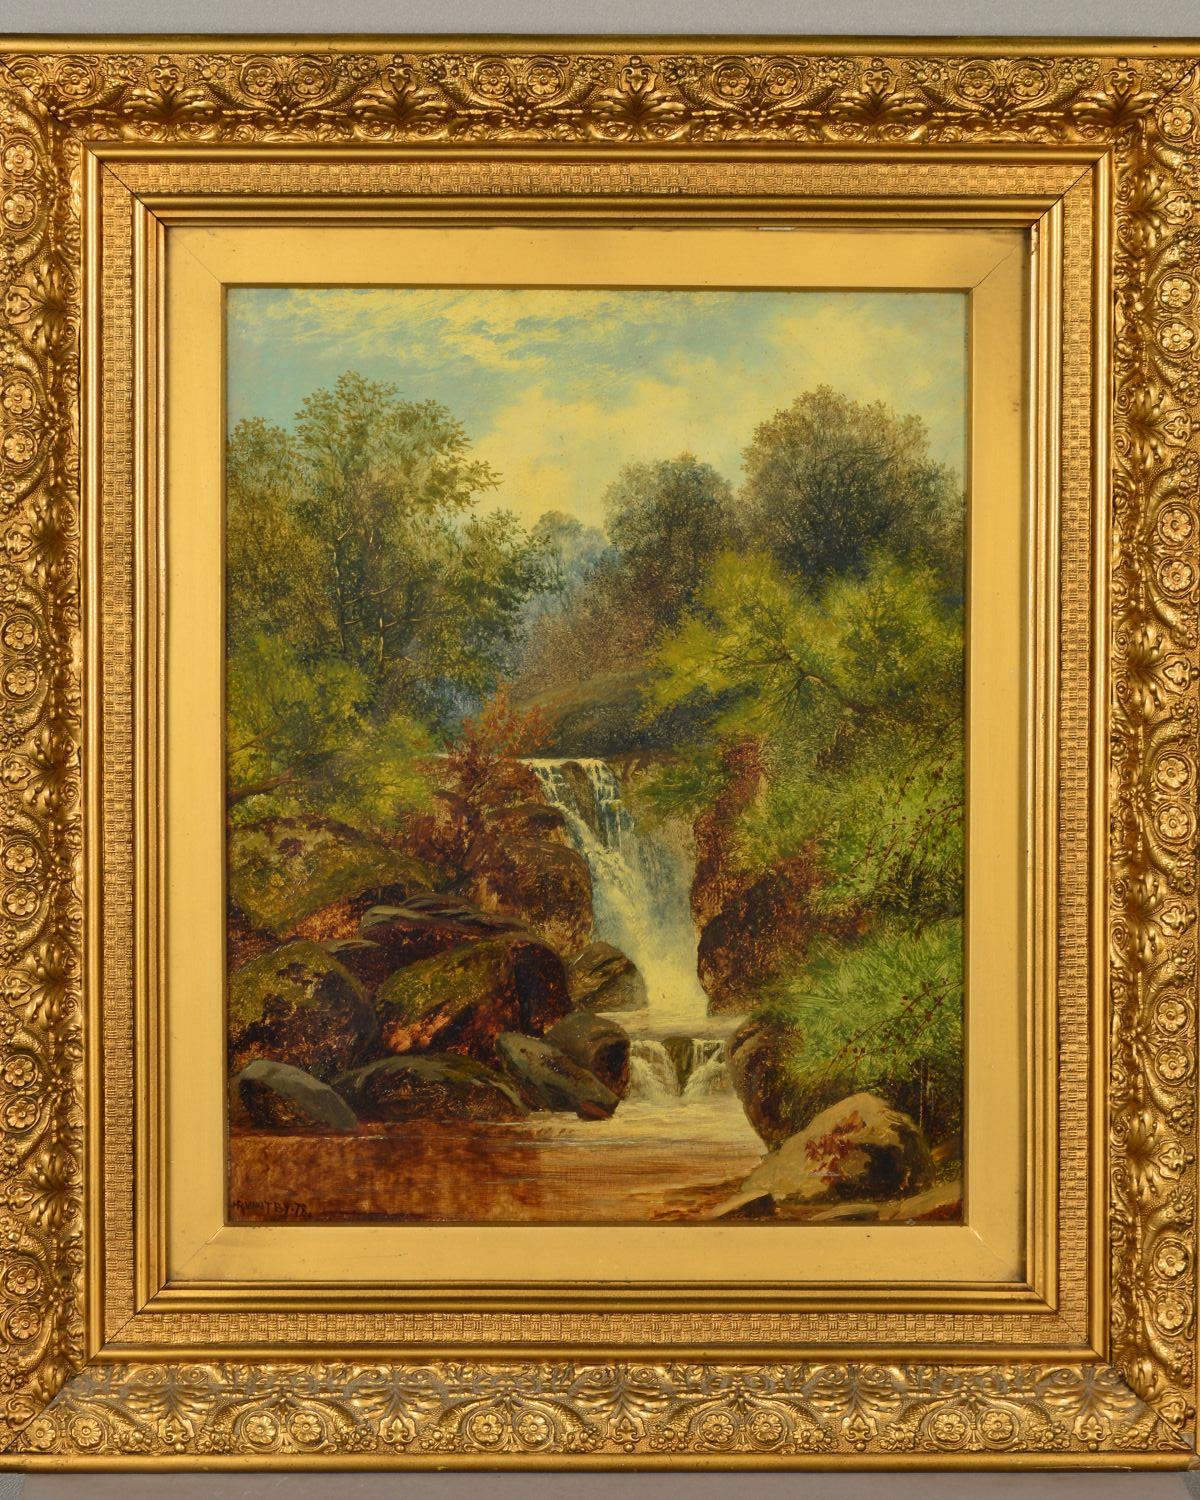 W.R. WHITBY (BRITISH LATE 19TH CENTURY), Mountainous river landscape with waterfall and companion - Image 5 of 9